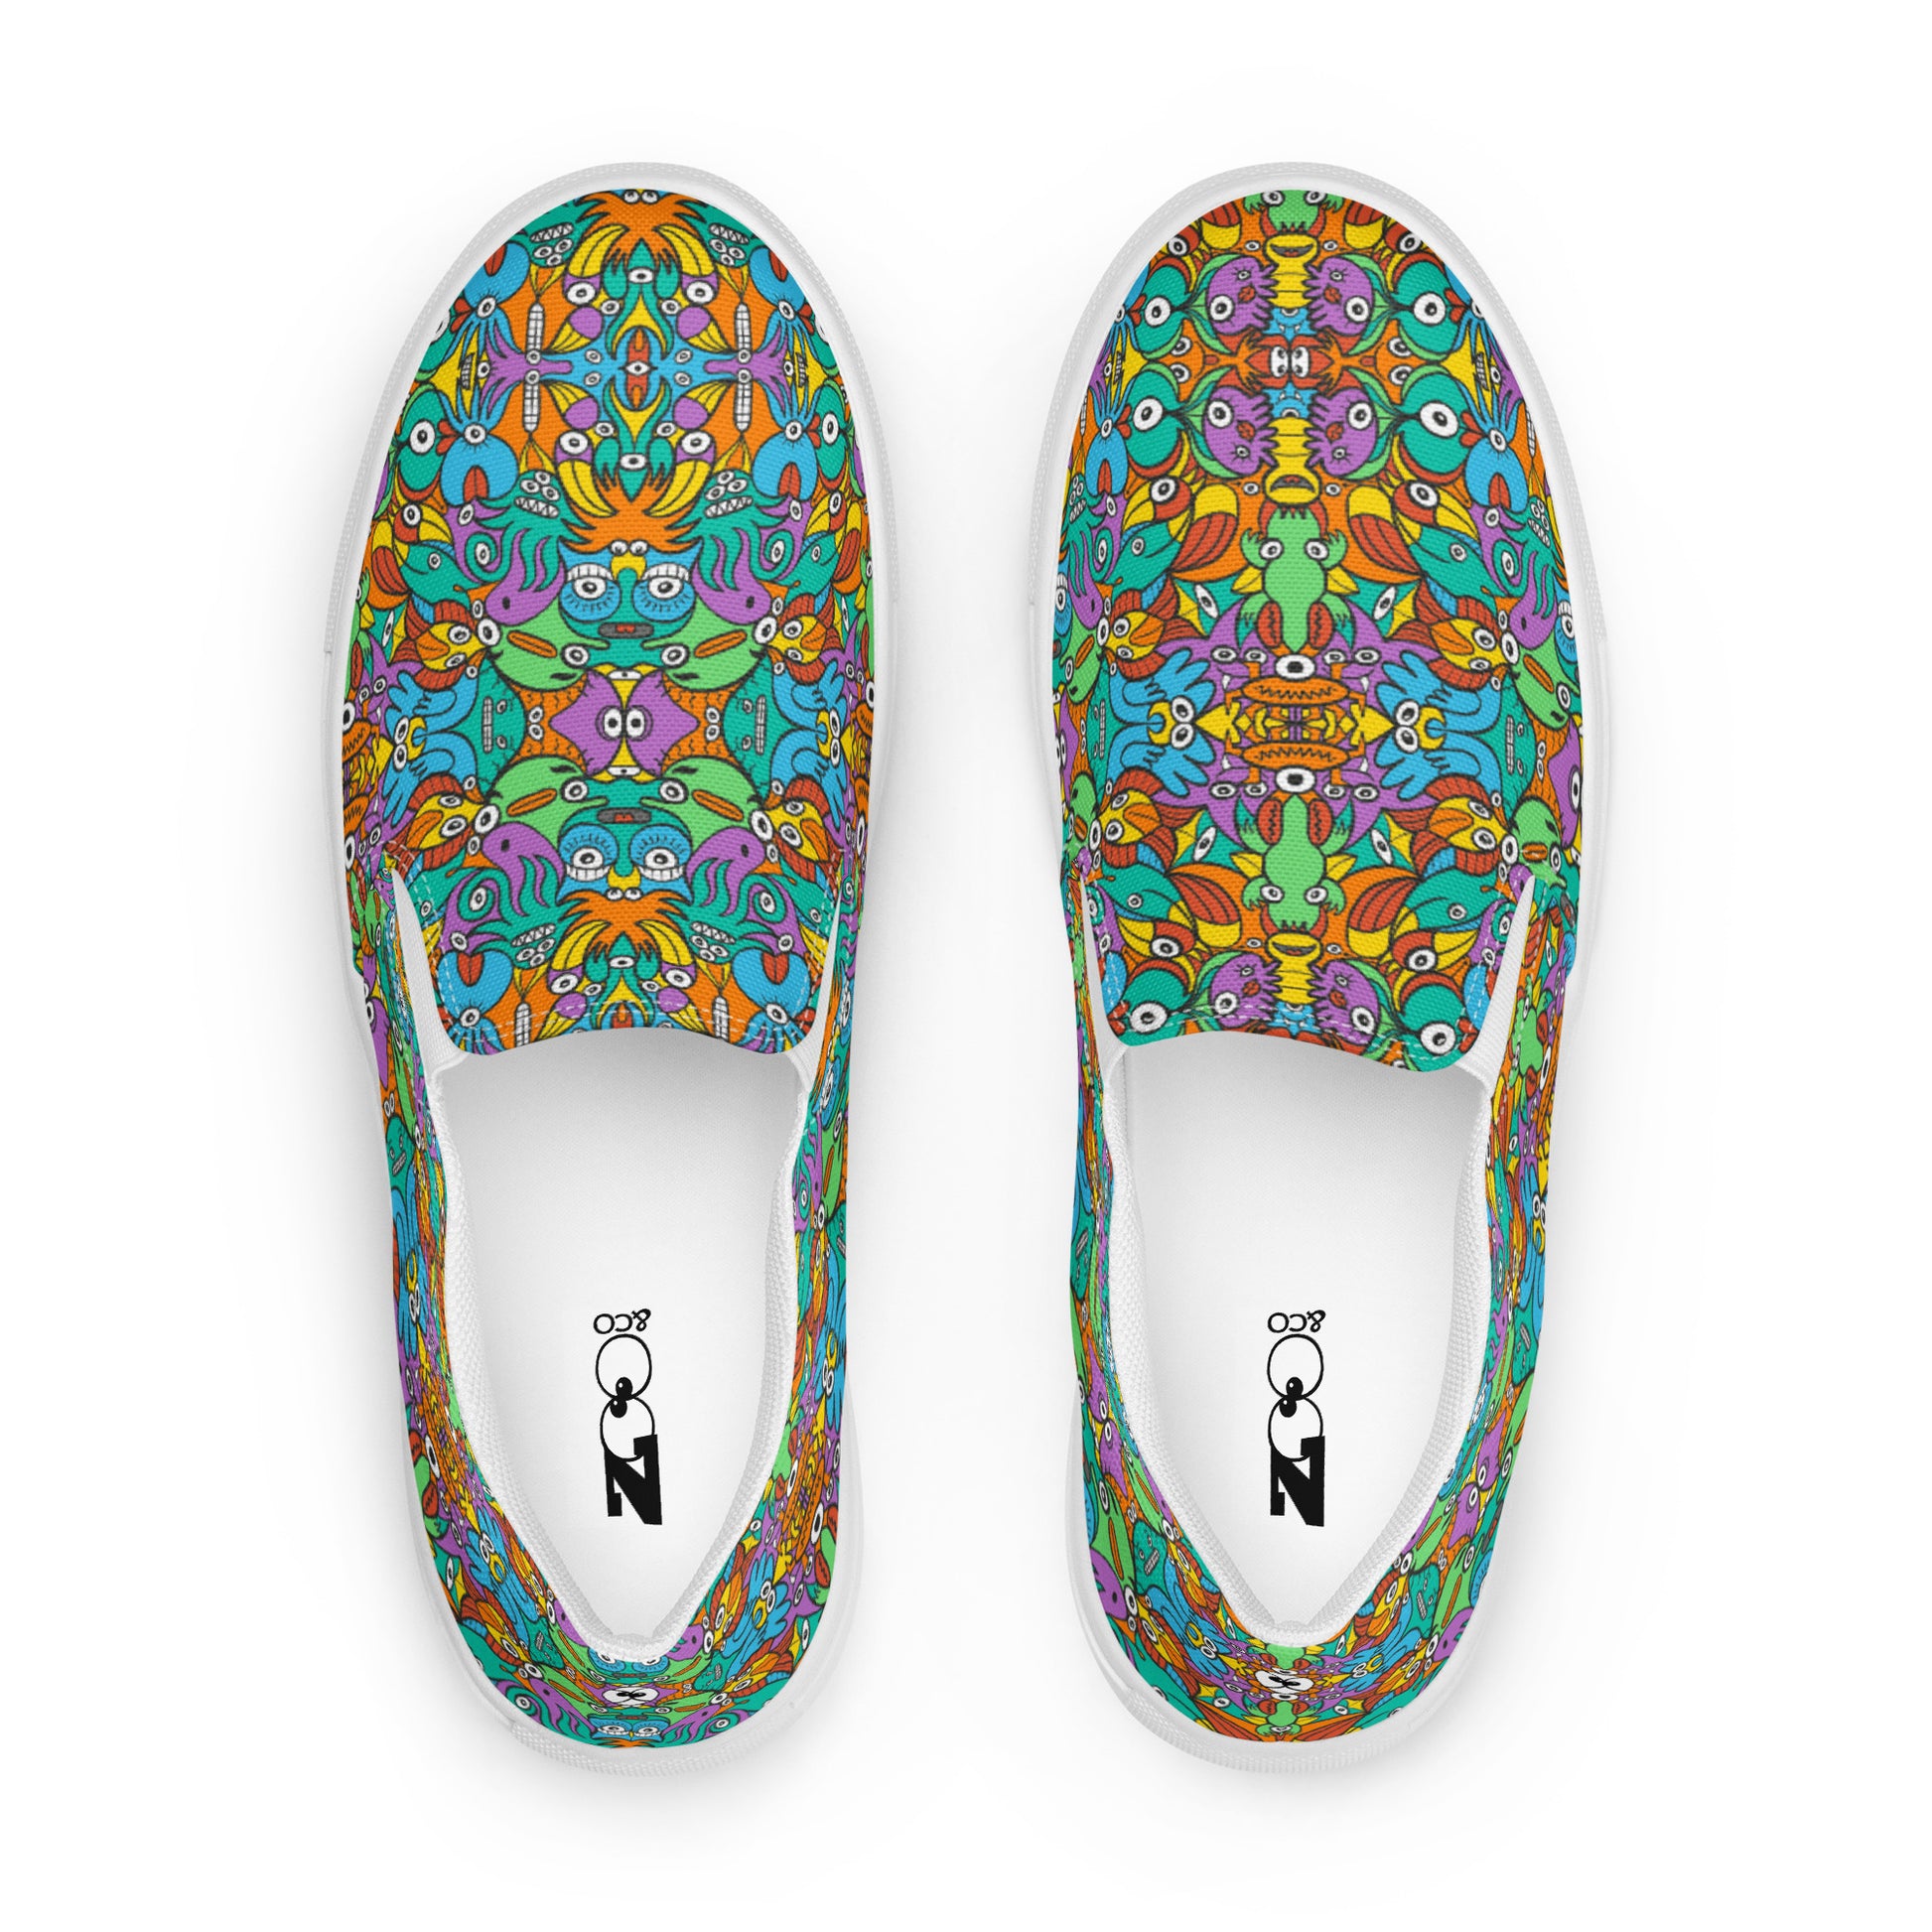 Fantastic doodle world full of weird creatures Men’s slip-on canvas shoes. Top view